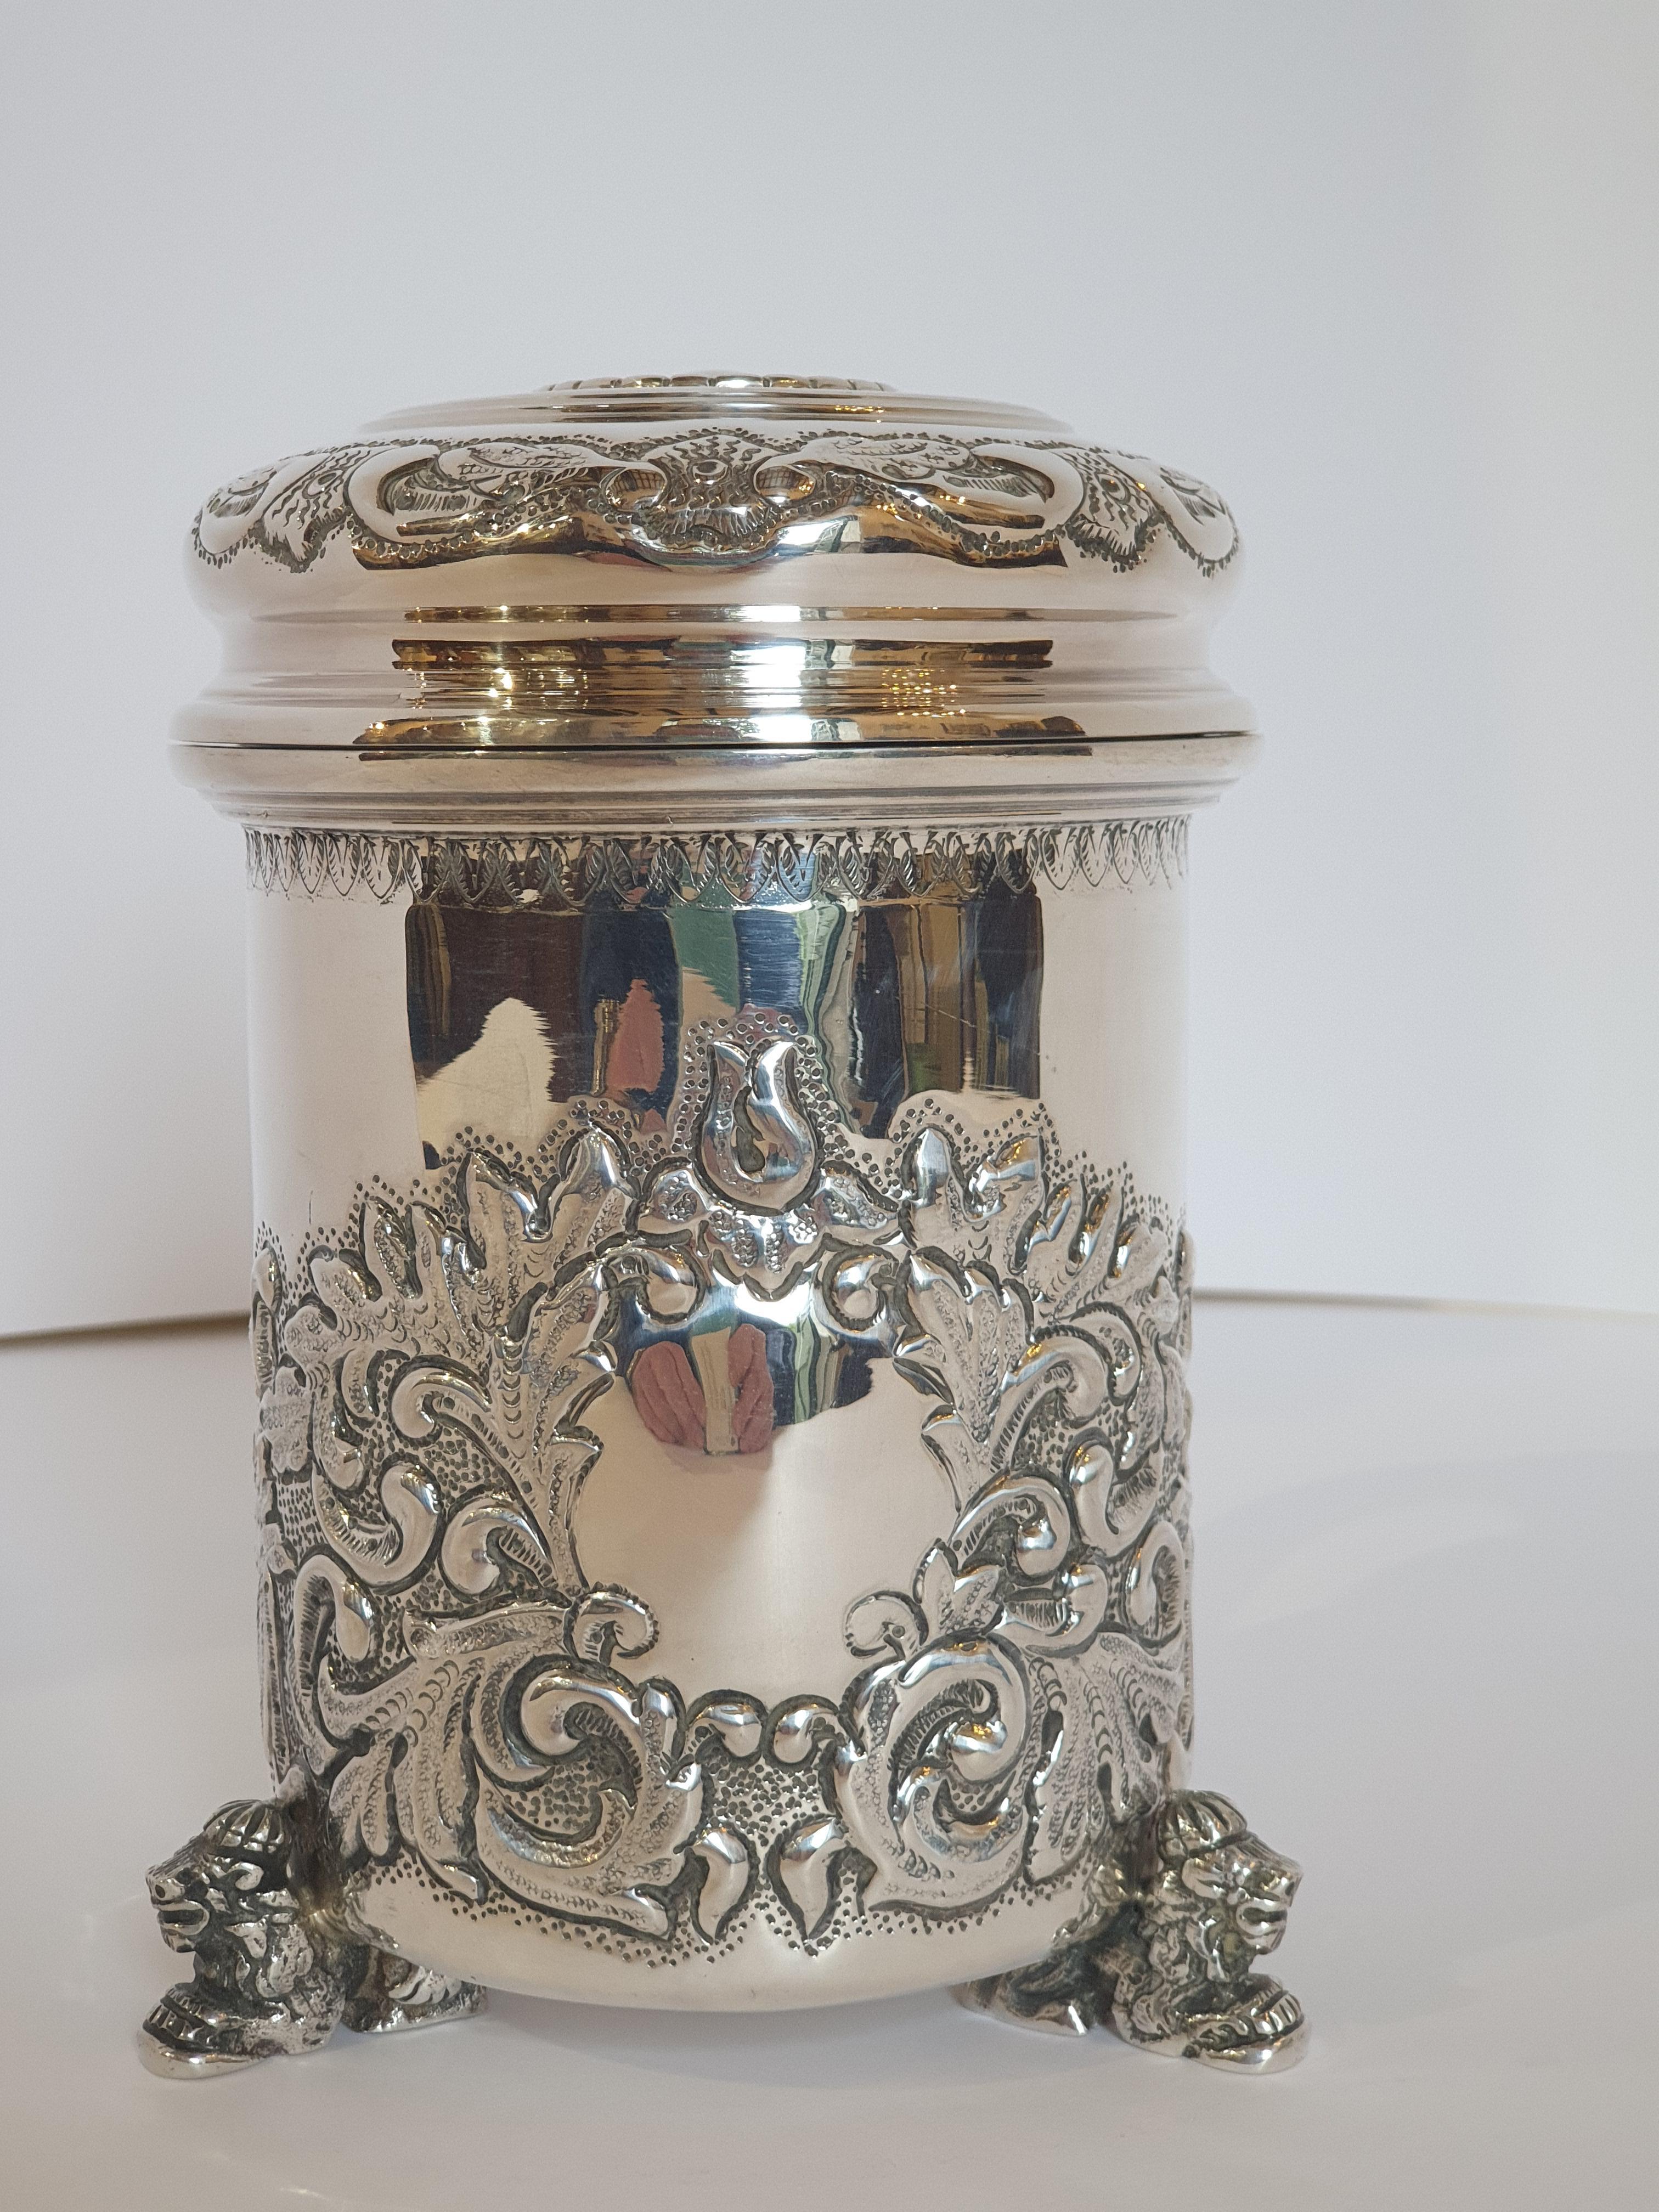 Magnificent tankard handcrafted in silver. This silver tankard is very intricately decorated with heavy repousse and chased metal work in a floral swag motif with a centralized cameo. The tree feet are done in figural seated lions and the finial are